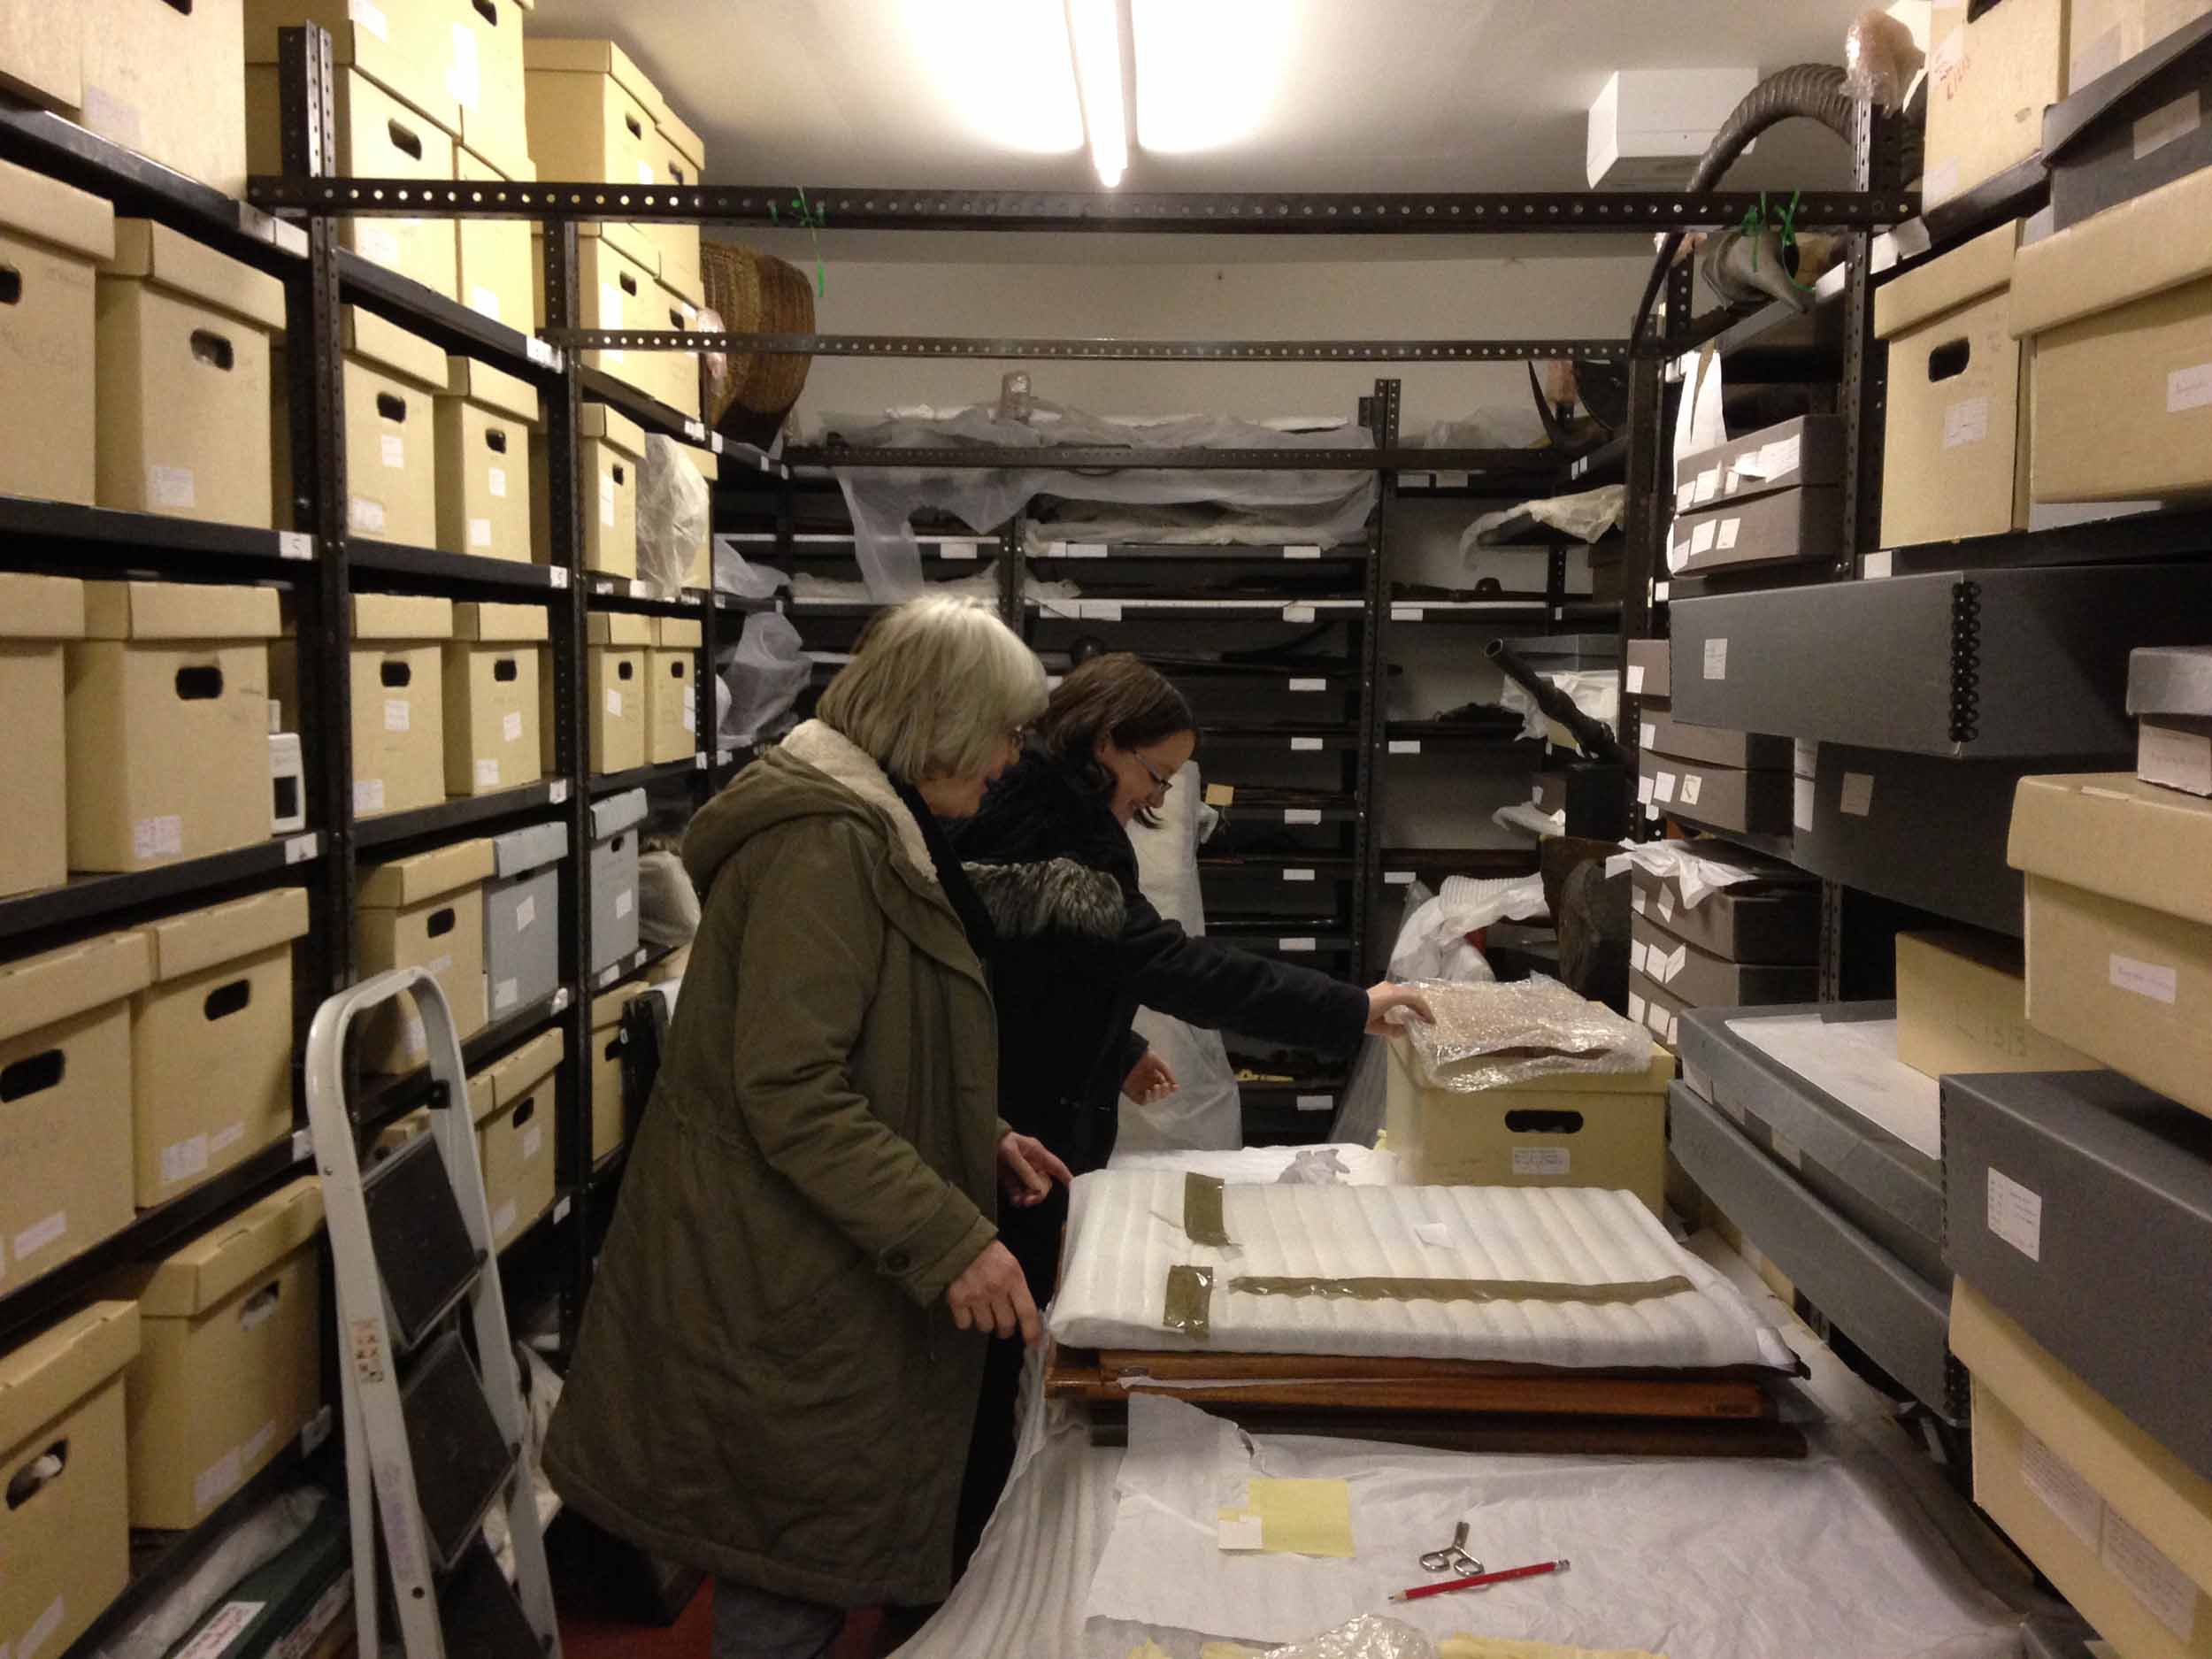 Anne Martin and Alison Ritchie in the archives of the David Livingstone Centre, 2014, by Adrian Wisnicki. Copyright Livingstone Online. Creative Commons Attribution-NonCommercial 3.0 Unported license (https://creativecommons.org/licenses/by-nc/3.0/).